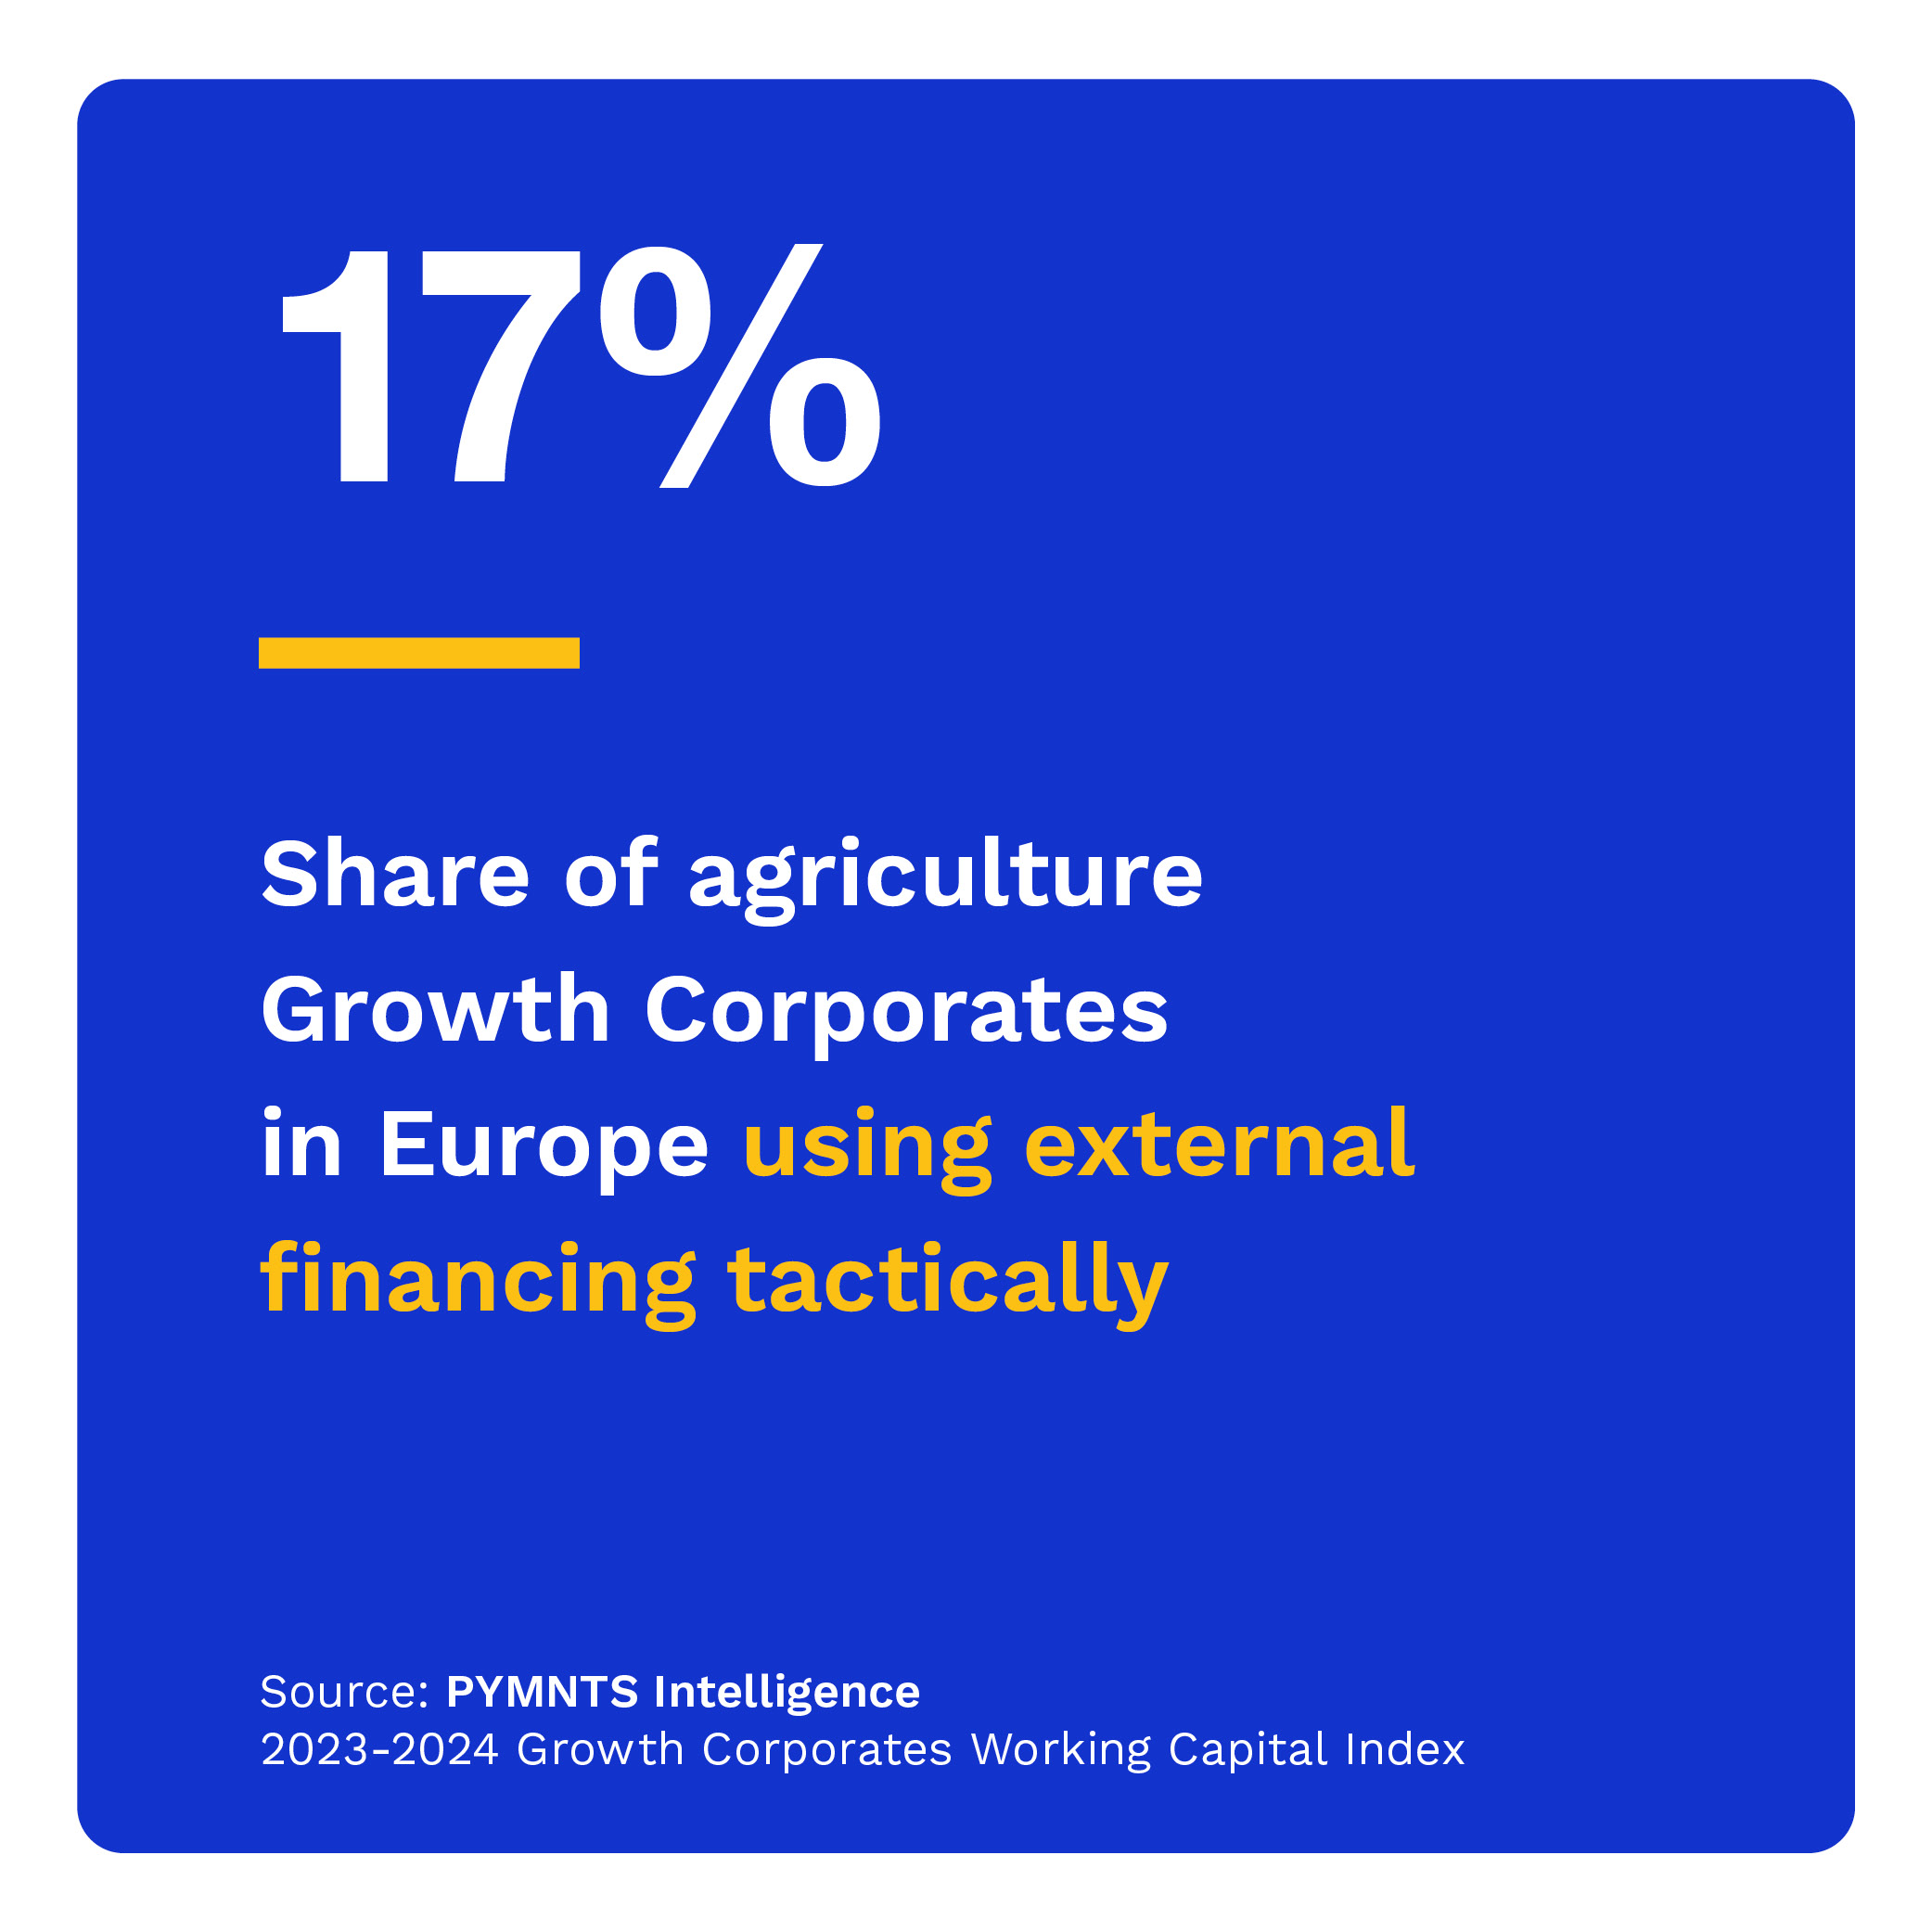  Share of agriculture Growth Corporates in Europe using external financing tactically